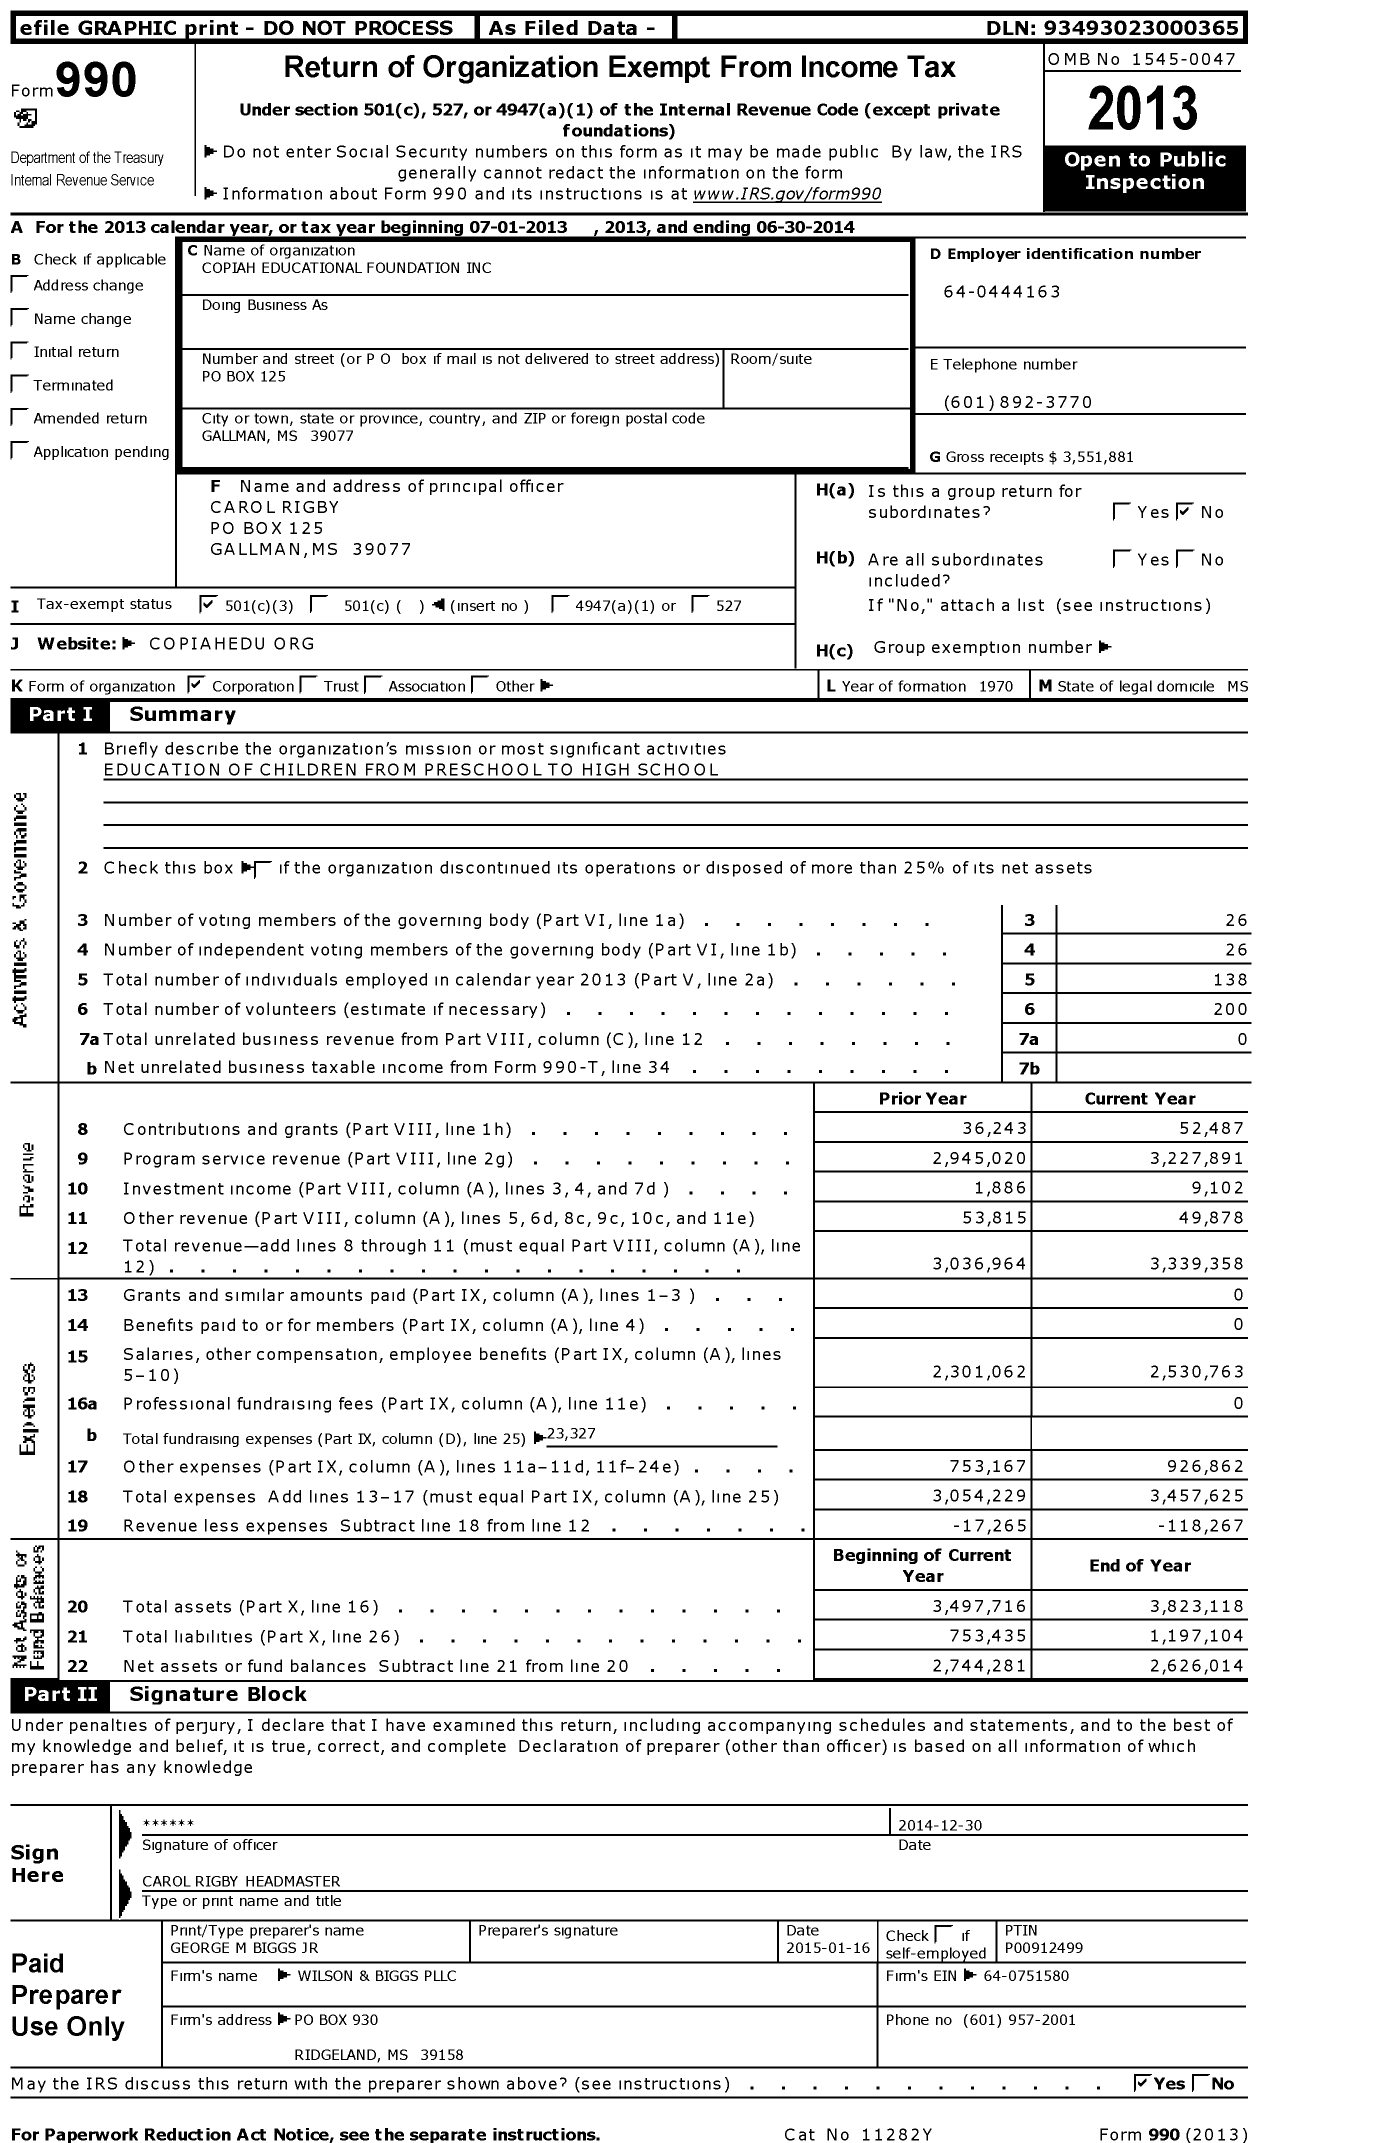 Image of first page of 2013 Form 990 for Copiah Educational Foundation